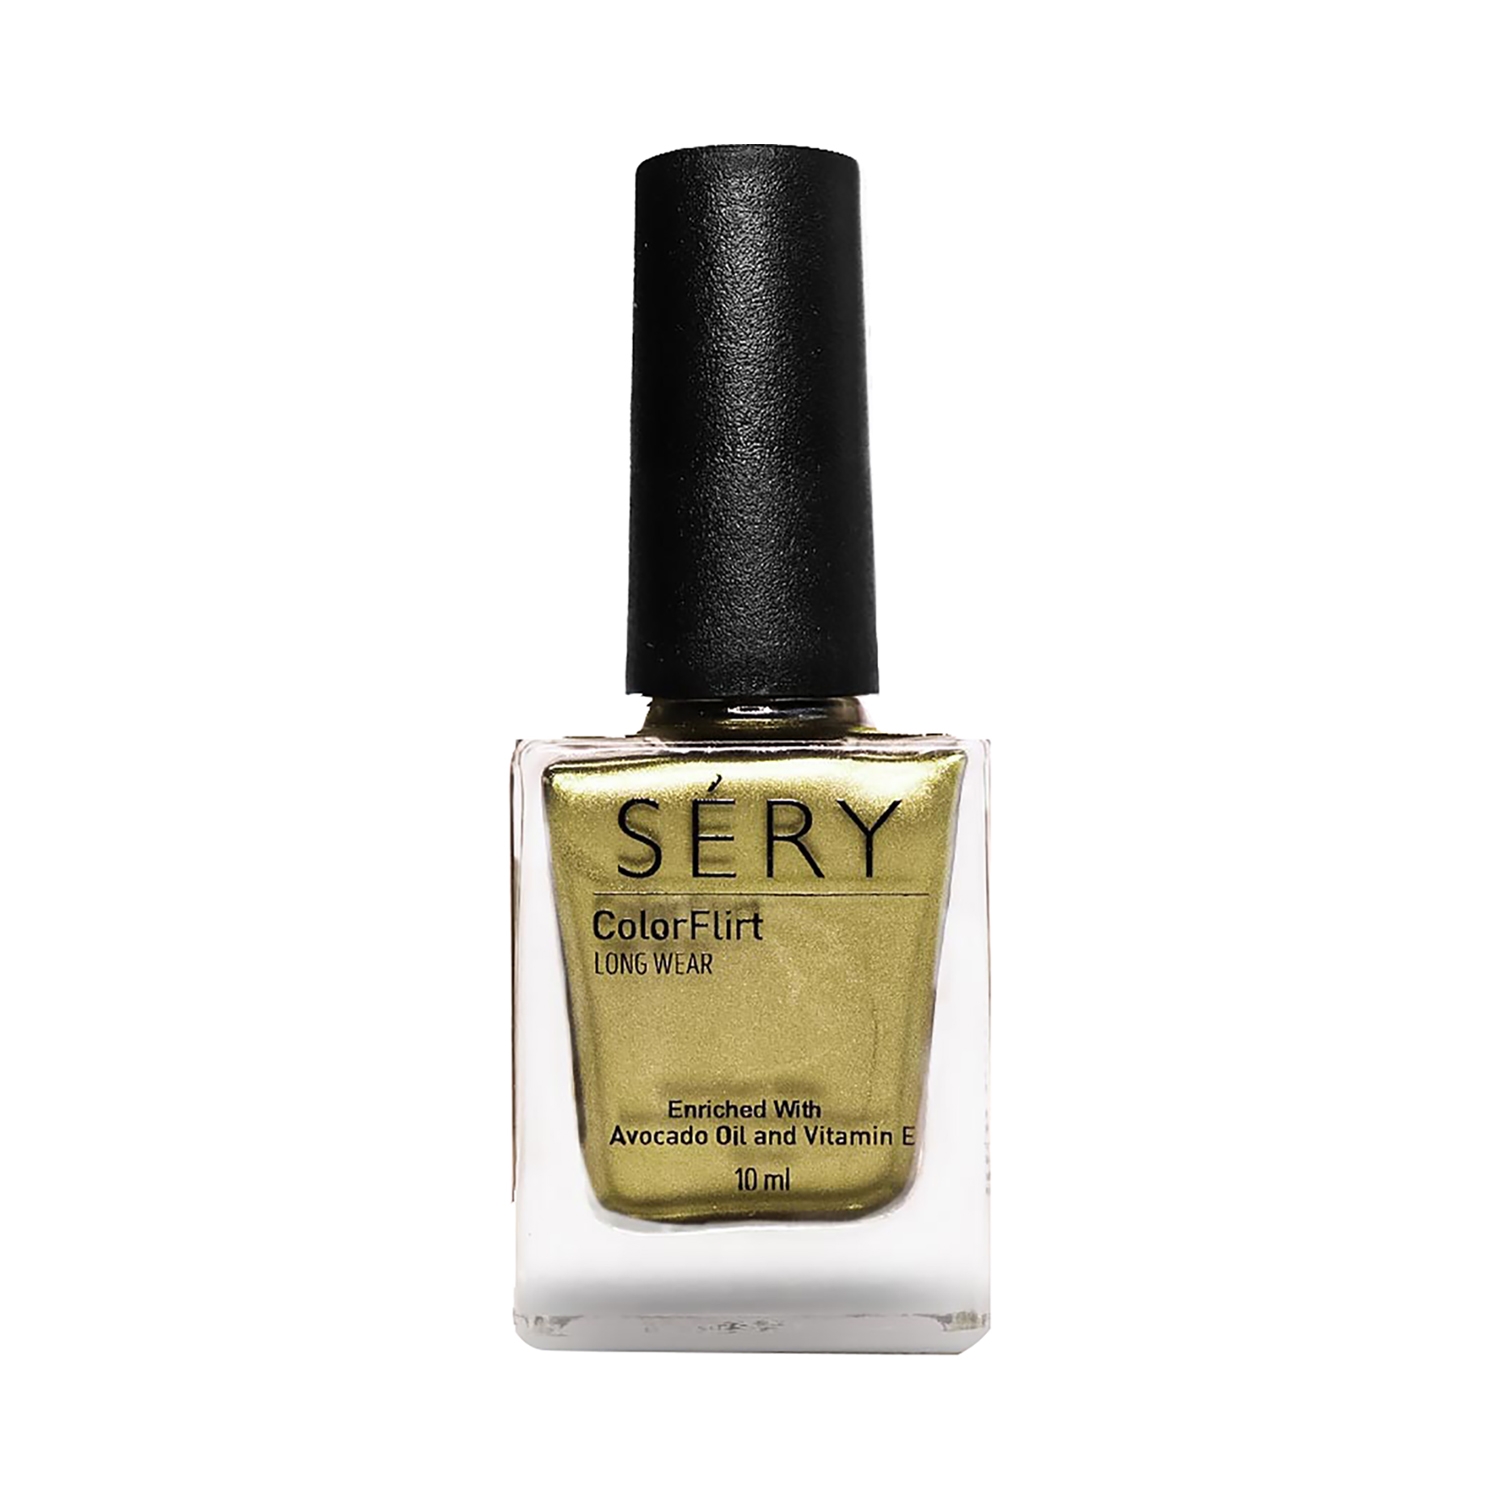 Maybelline Color Show Go Graffiti Nail Polish in Unmellow Yellow Review &  Swatches | Yellow nail art, Yellow nails, Trendy nail design